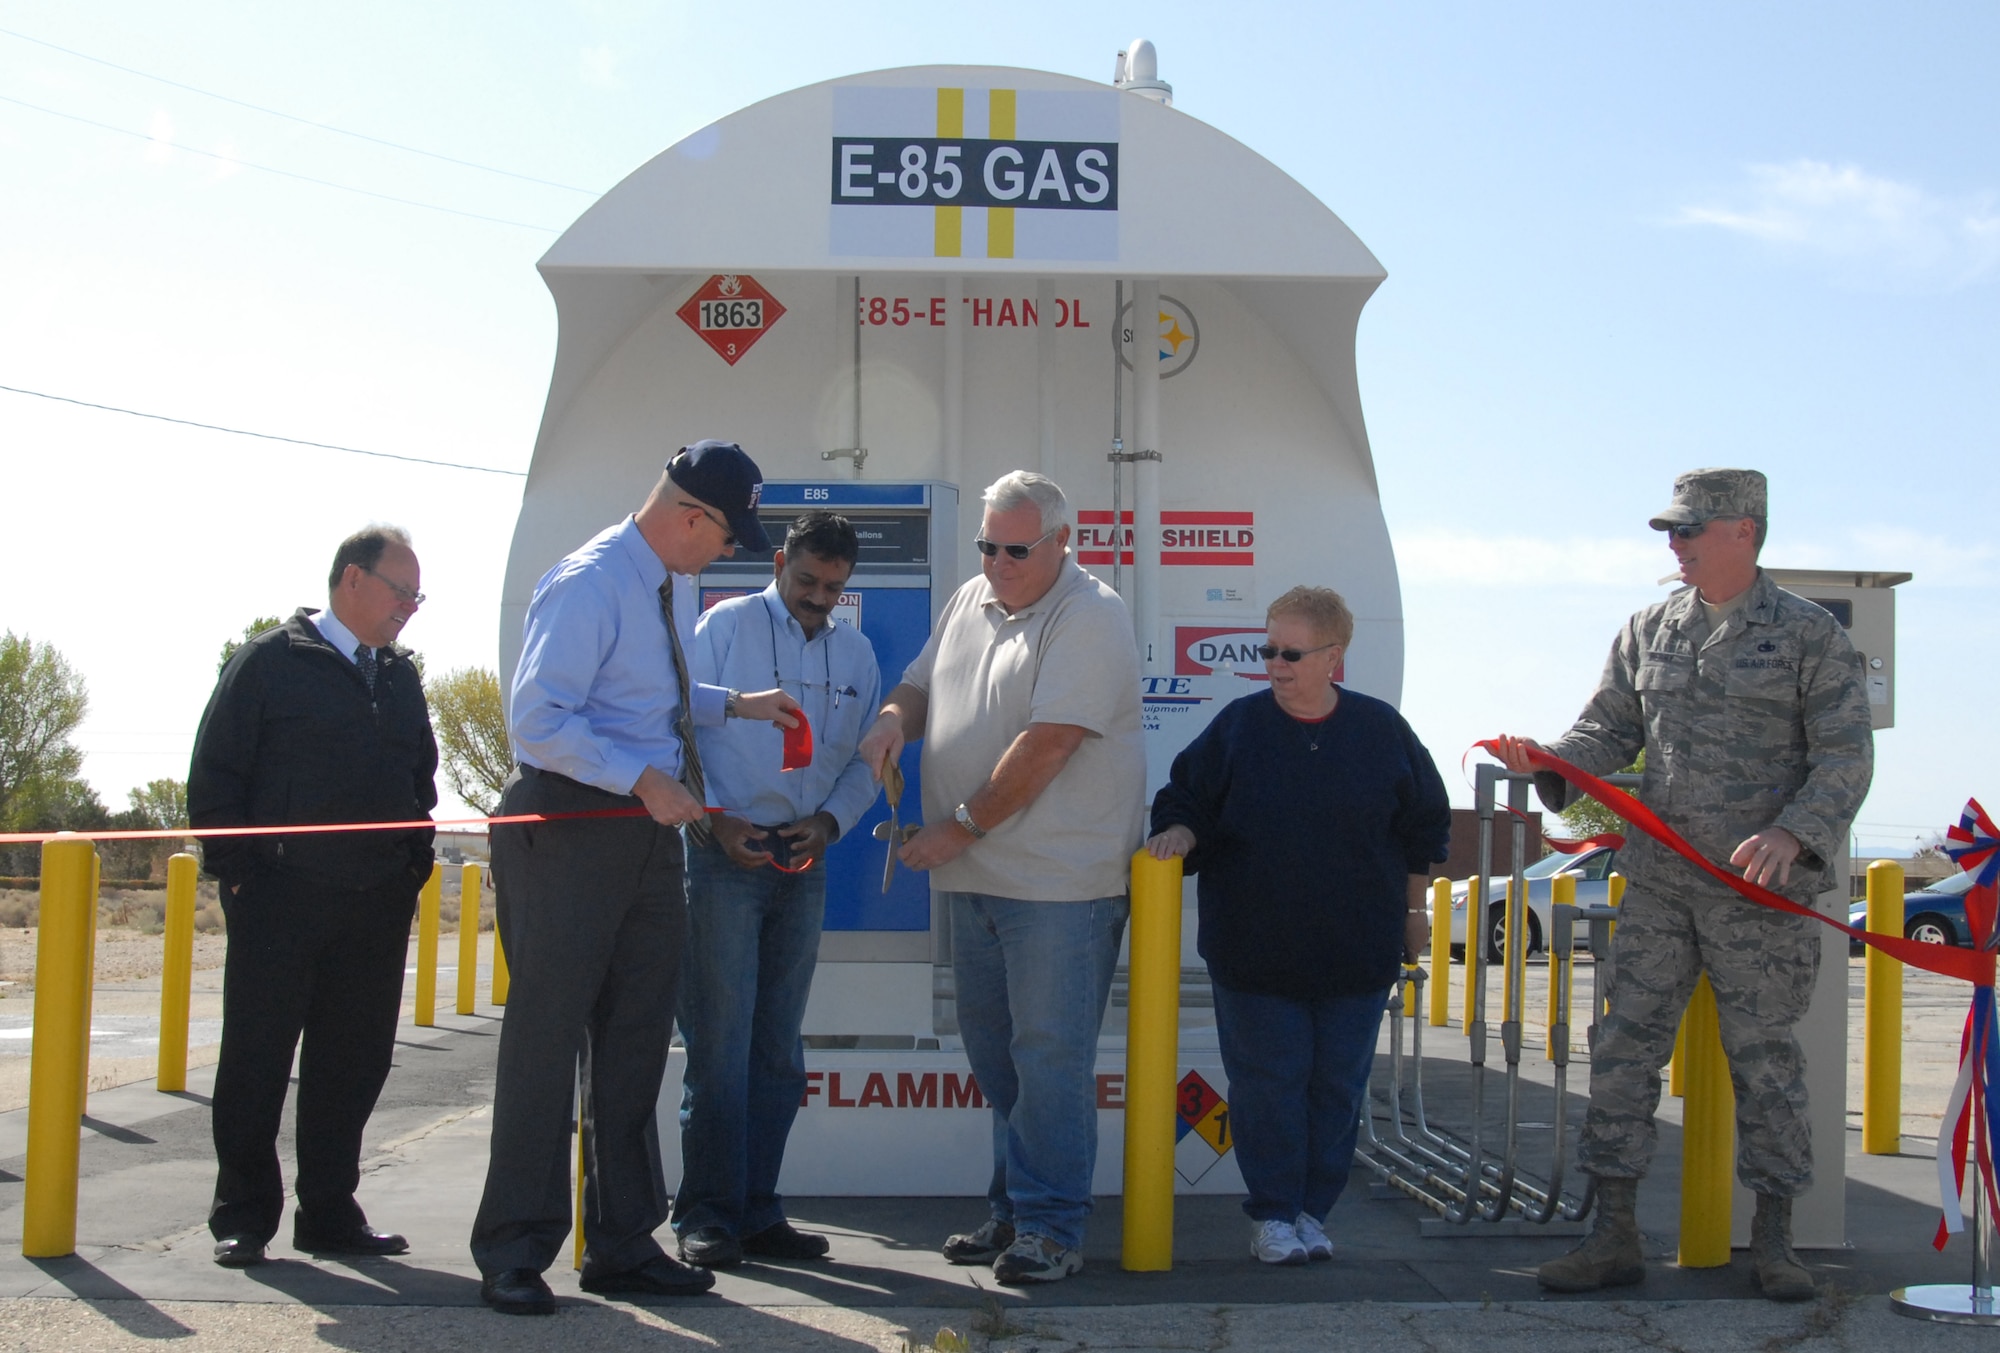 Team Edwards members cut pieces of the ceremonial ribbon that officially opened the new E85 fuel tank at the Government Gas Station April 6.  E85, commonly called fuel ethanol, is made of 85-percent ethanol blended with 15-percent gasoline and is more environmentally friendly than regular gasoline. Pictured from left: Randy Beckett, 95th Civil Engineering Division deputy director; James Judkins, 95th CE director; Satwaji Kumar, 95th CE Infrastructure Systems engineer; Cliff Cunningham, 95th Mission Support Group fuels testing and technical advisor; Sandra Sergent, 95th MSG Logistics and Readiness division chief; and Col. Buddy Berry, 95th MSG commander.  (Air Force photo by Kenji Thuloweit) 